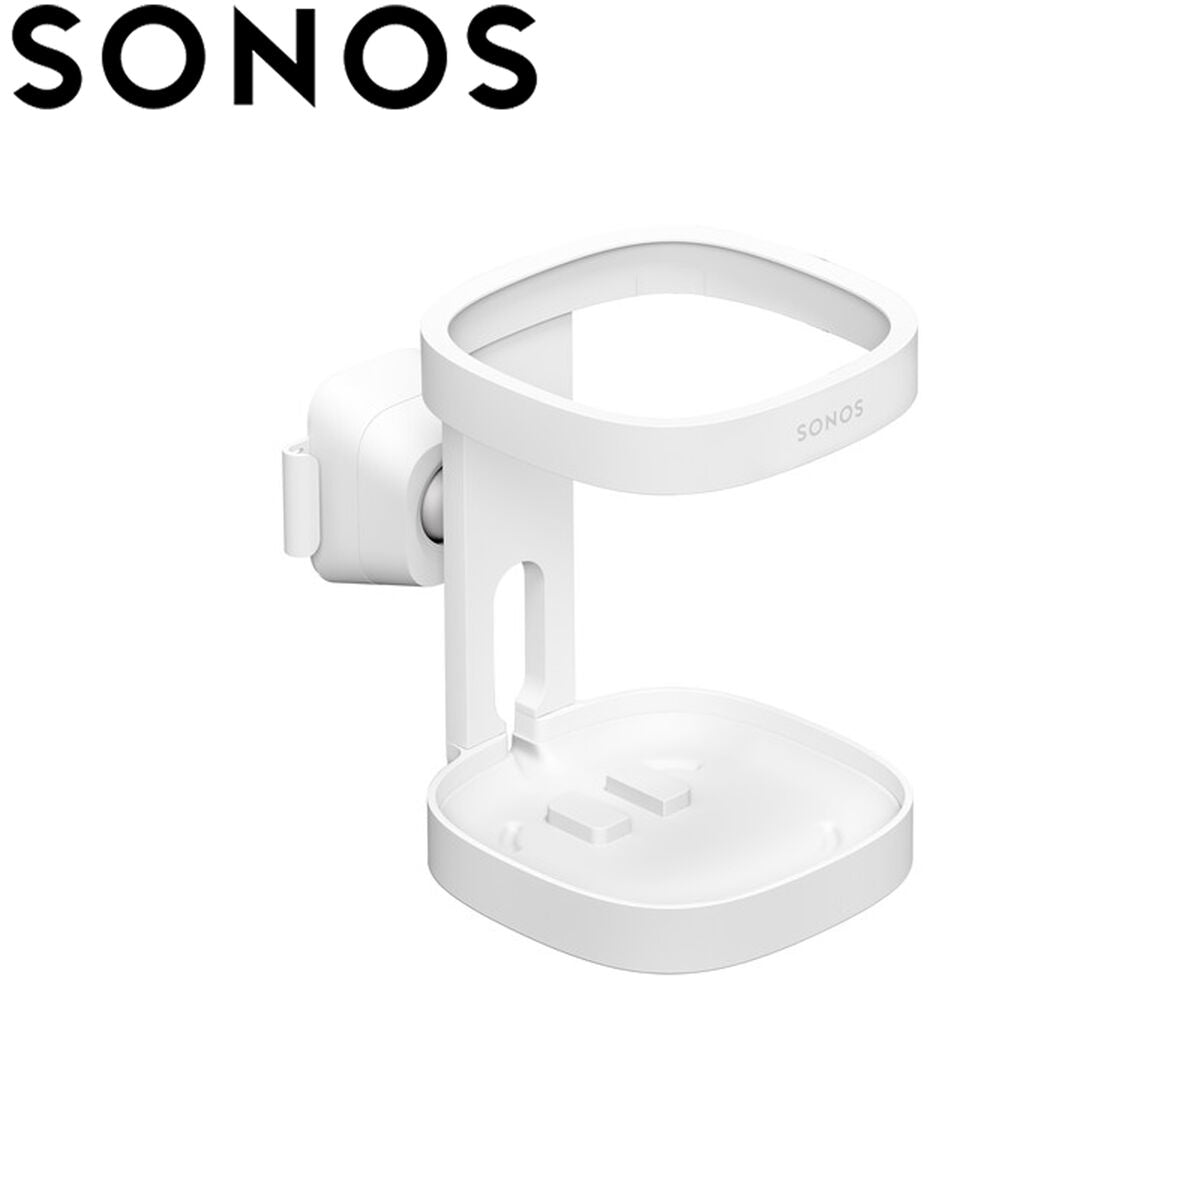 Speaker Stand Sonos ONE and PLAY, Sonos, Electronics, Audio and Hi-Fi equipment, speaker-stand-sonos-one-and-play, Brand_Sonos, category-reference-2609, category-reference-2637, category-reference-2882, category-reference-t-19653, category-reference-t-19899, category-reference-t-21329, category-reference-t-25554, category-reference-t-7441, cinema and television, Condition_NEW, music, Price_50 - 100, RiotNook